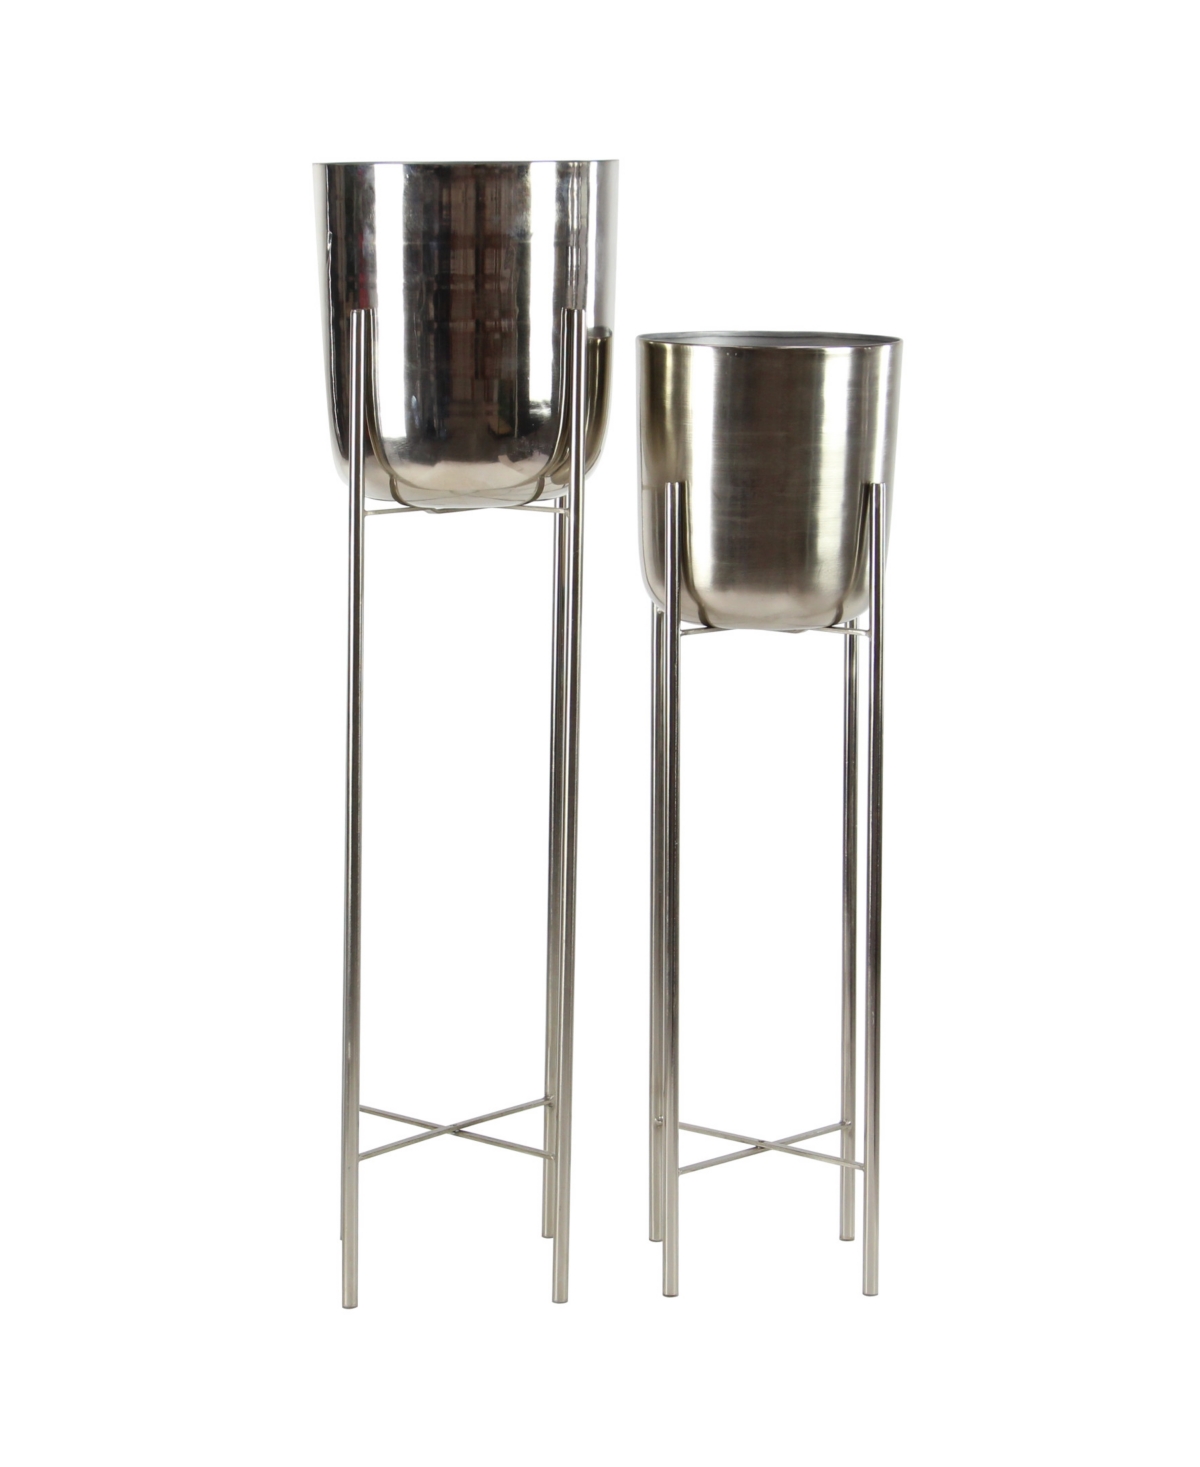 Large Modern Metallic Planters with Stands, Set of 2 - Silver-tone